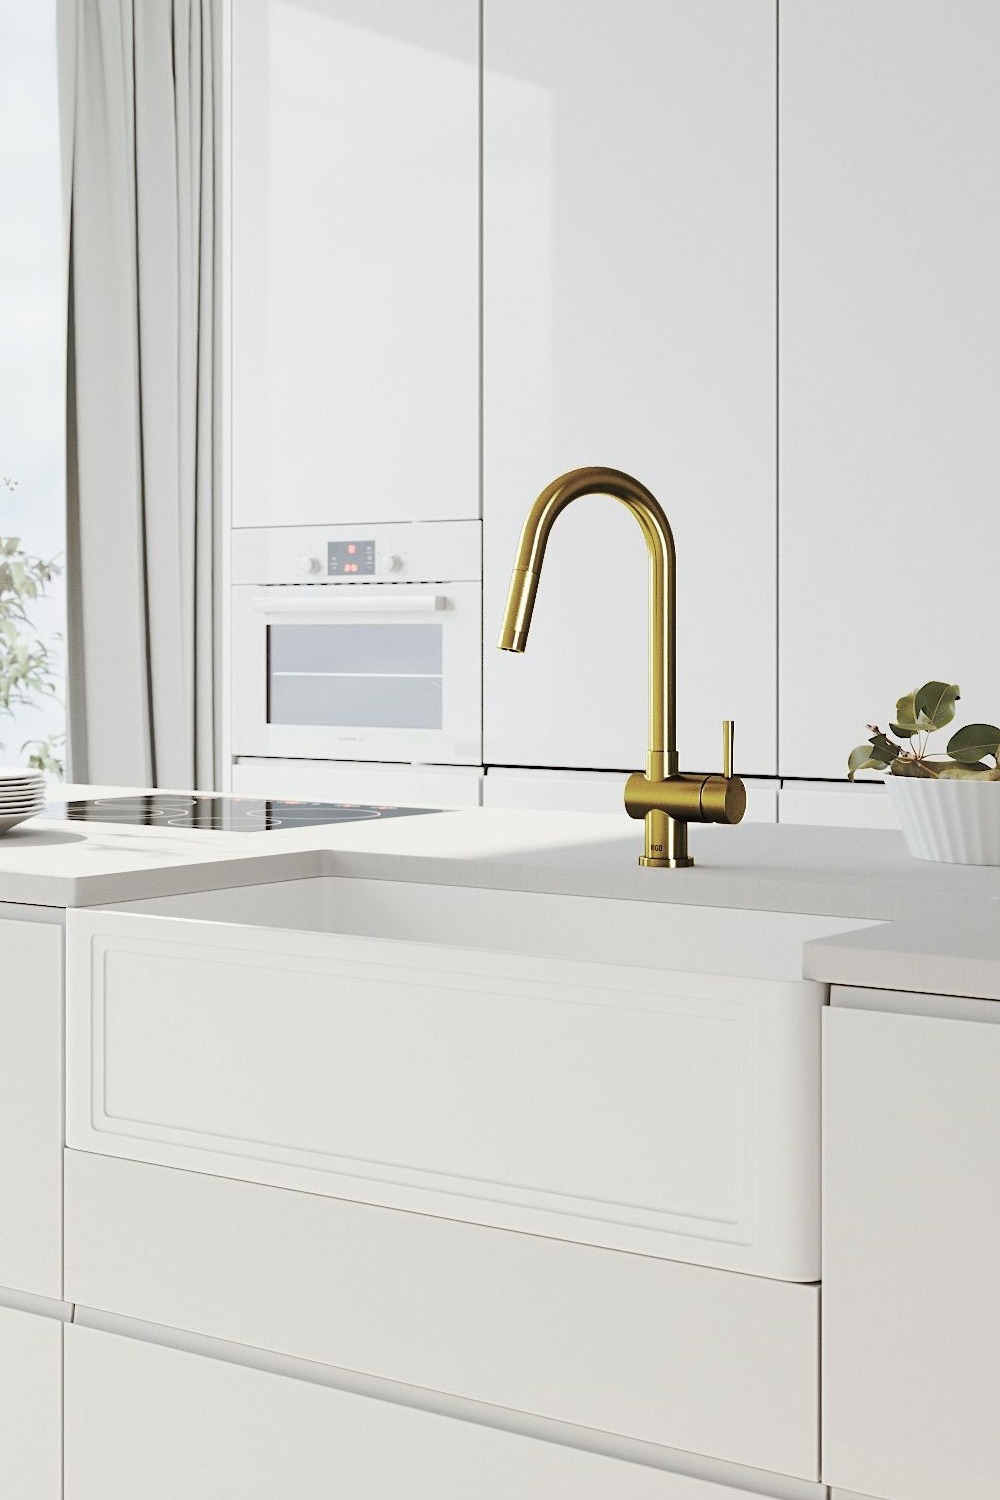 Contemporary Kitchen Faucets Single Handle Water Sink Brass Gold Finish Kitchen Faucet Features Spout Sprayer Function Flow Spray Model Single Create Pots Fill